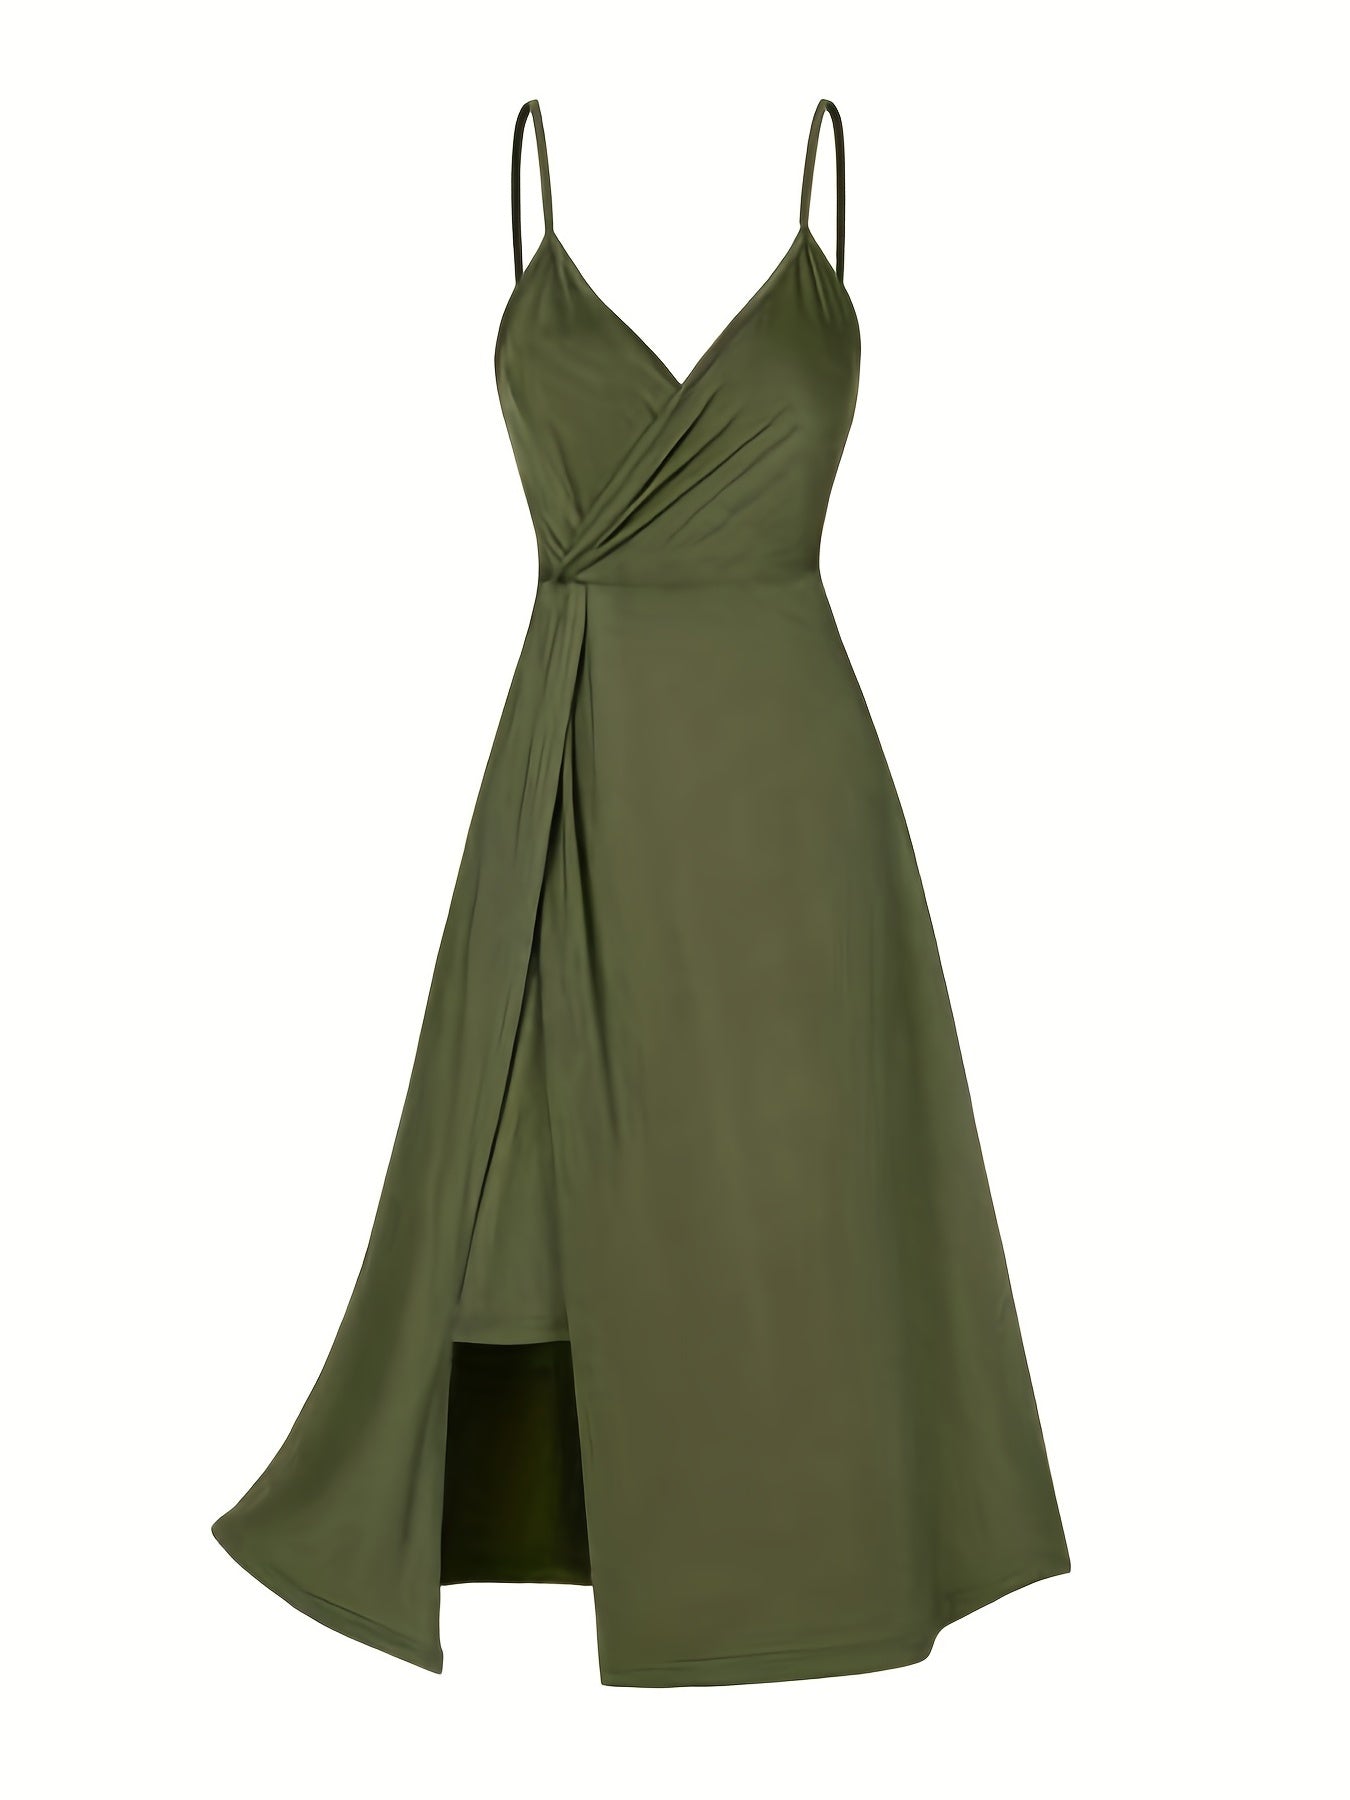 Empower Your Style with Our Elegant Twist Spaghetti Strap Dress for Women